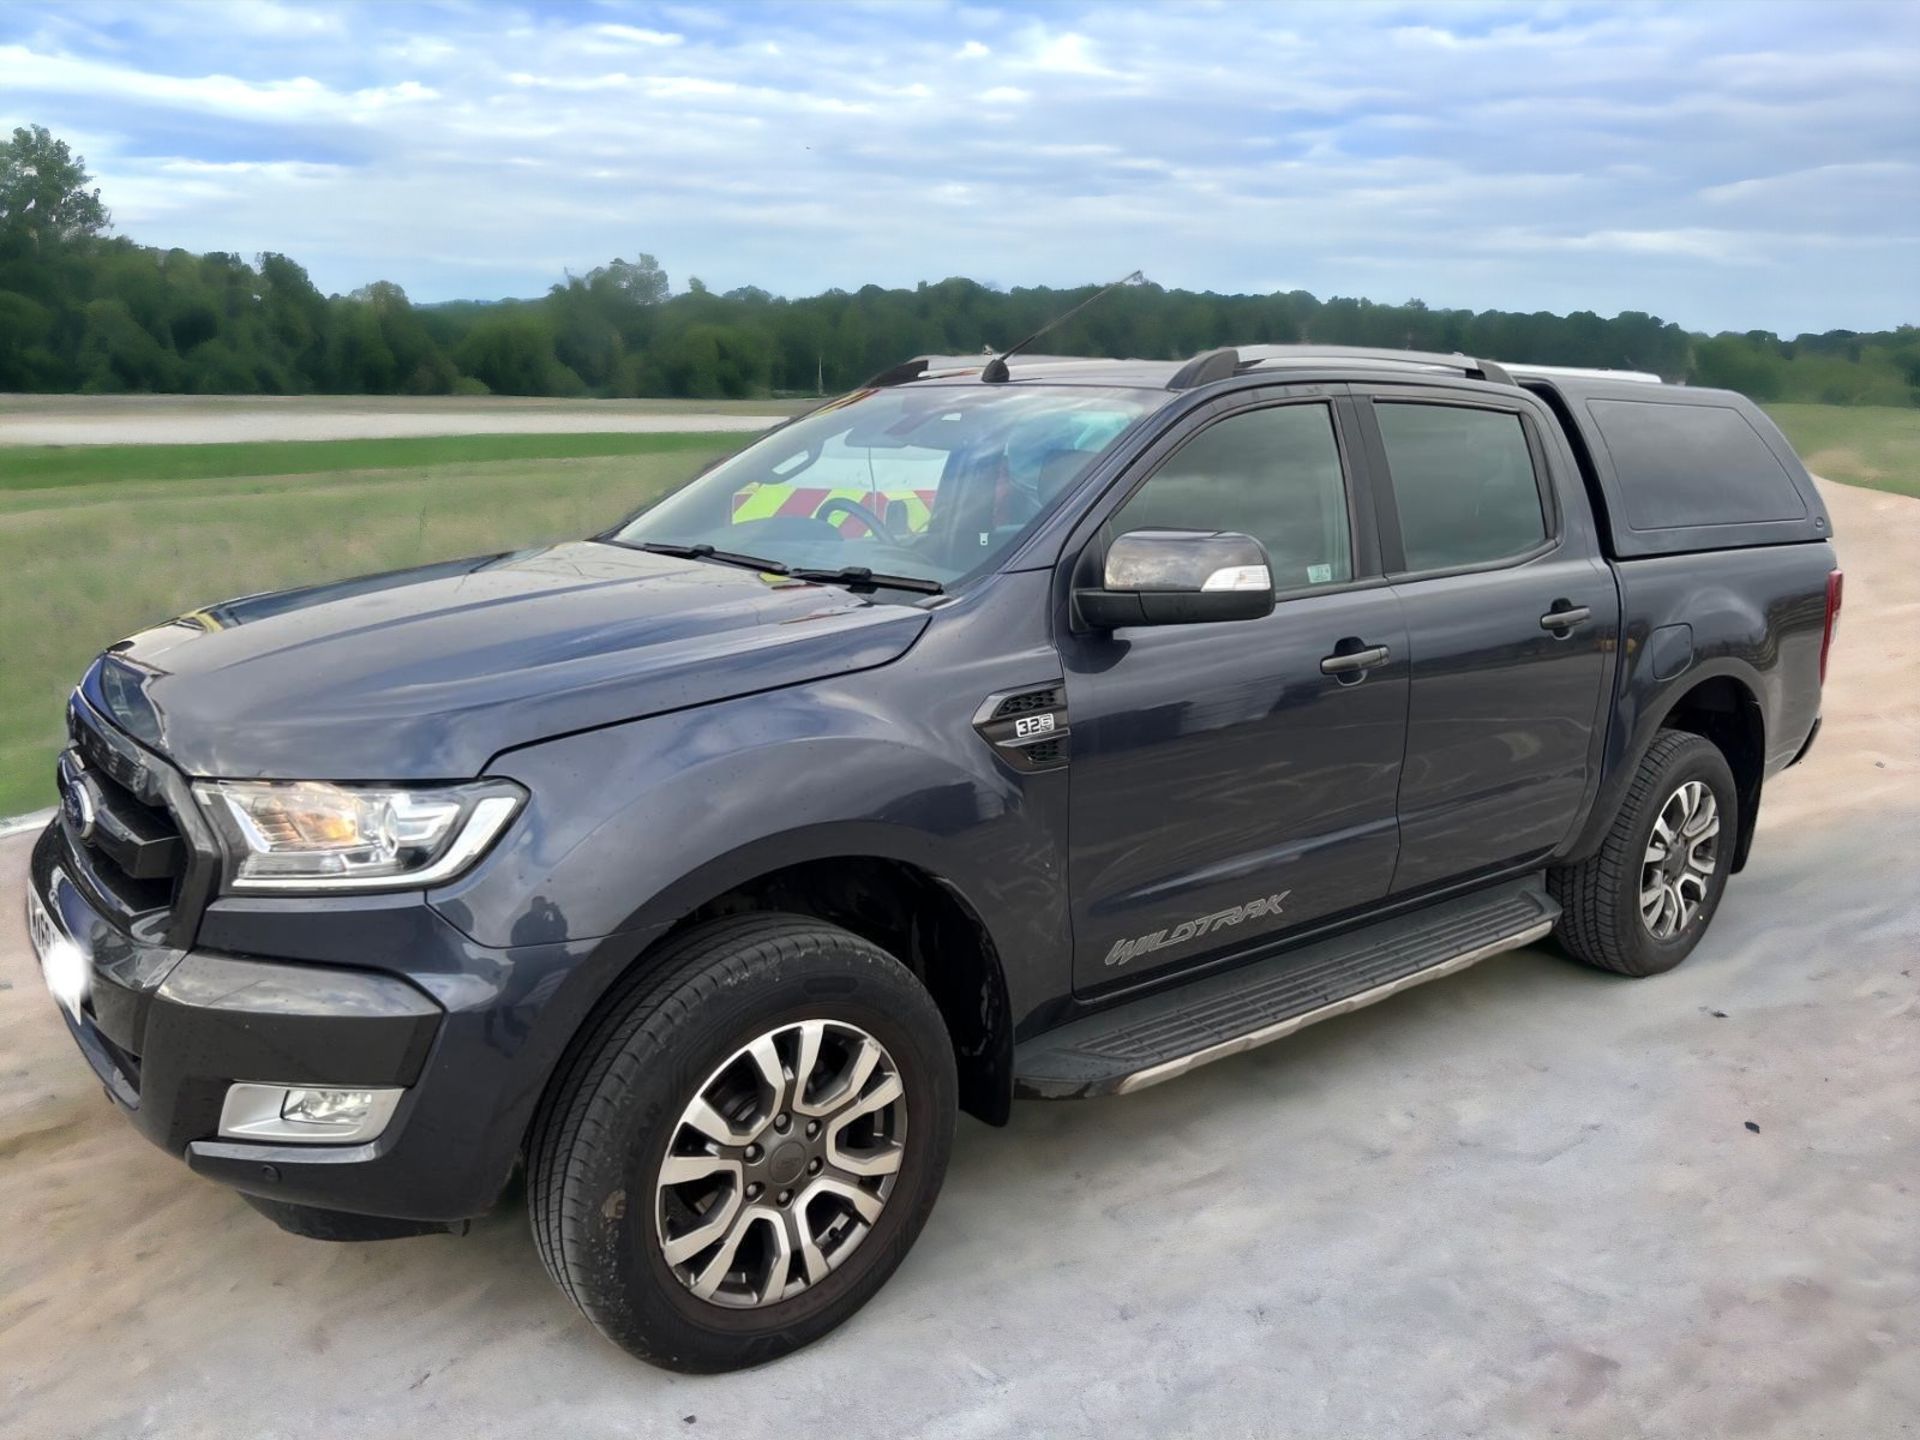 2018 FORD RANGER WILDTRAK DOUBLE CAB - ADVENTURE AWAITS - Image 2 of 20